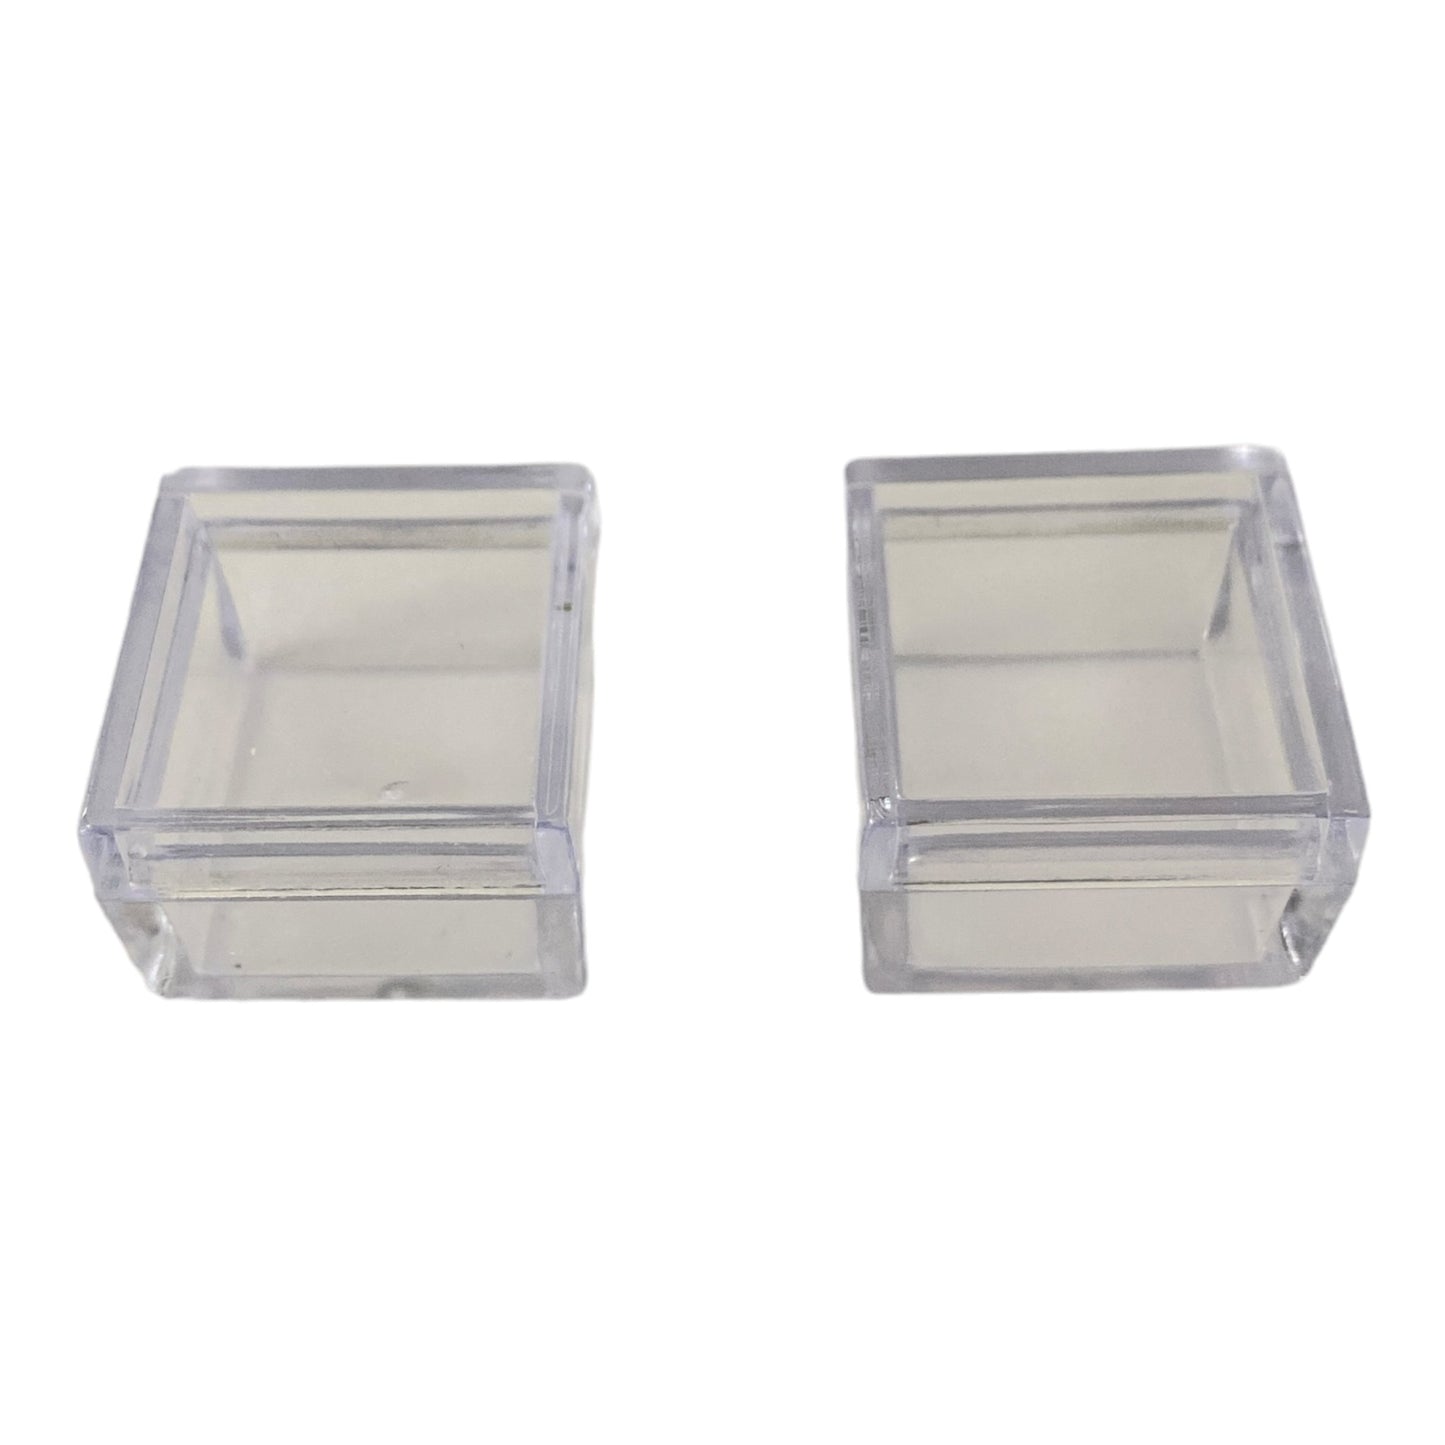 Clear Plastic Container - Fill with Gems, shells or Beads - Square - 25x25x18mm - NEW424